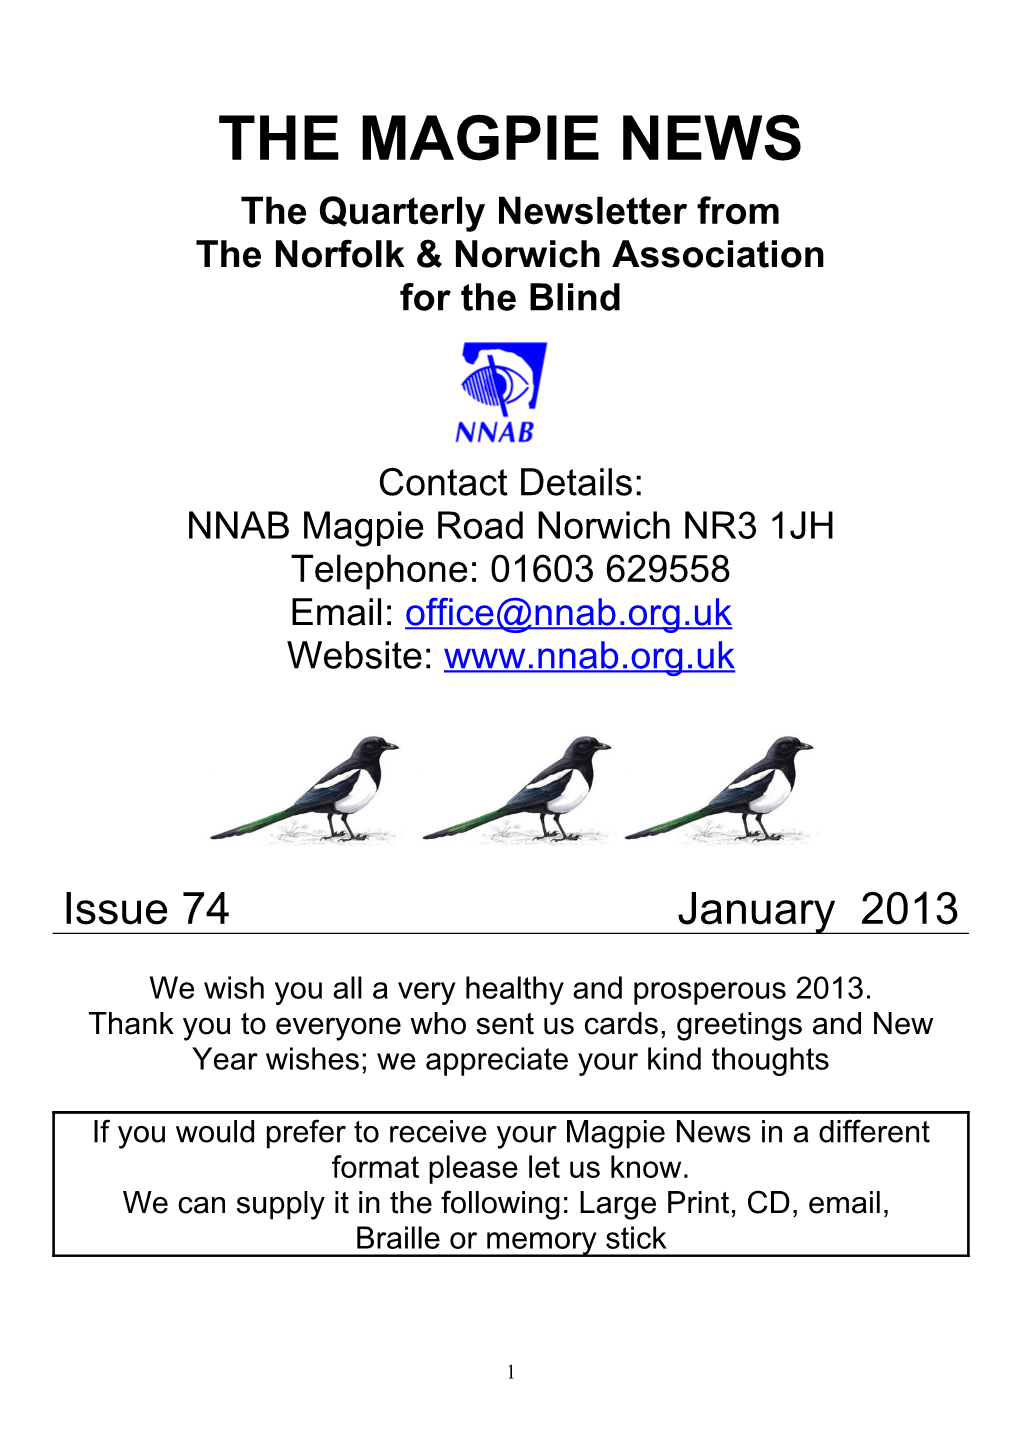 The Magpie News